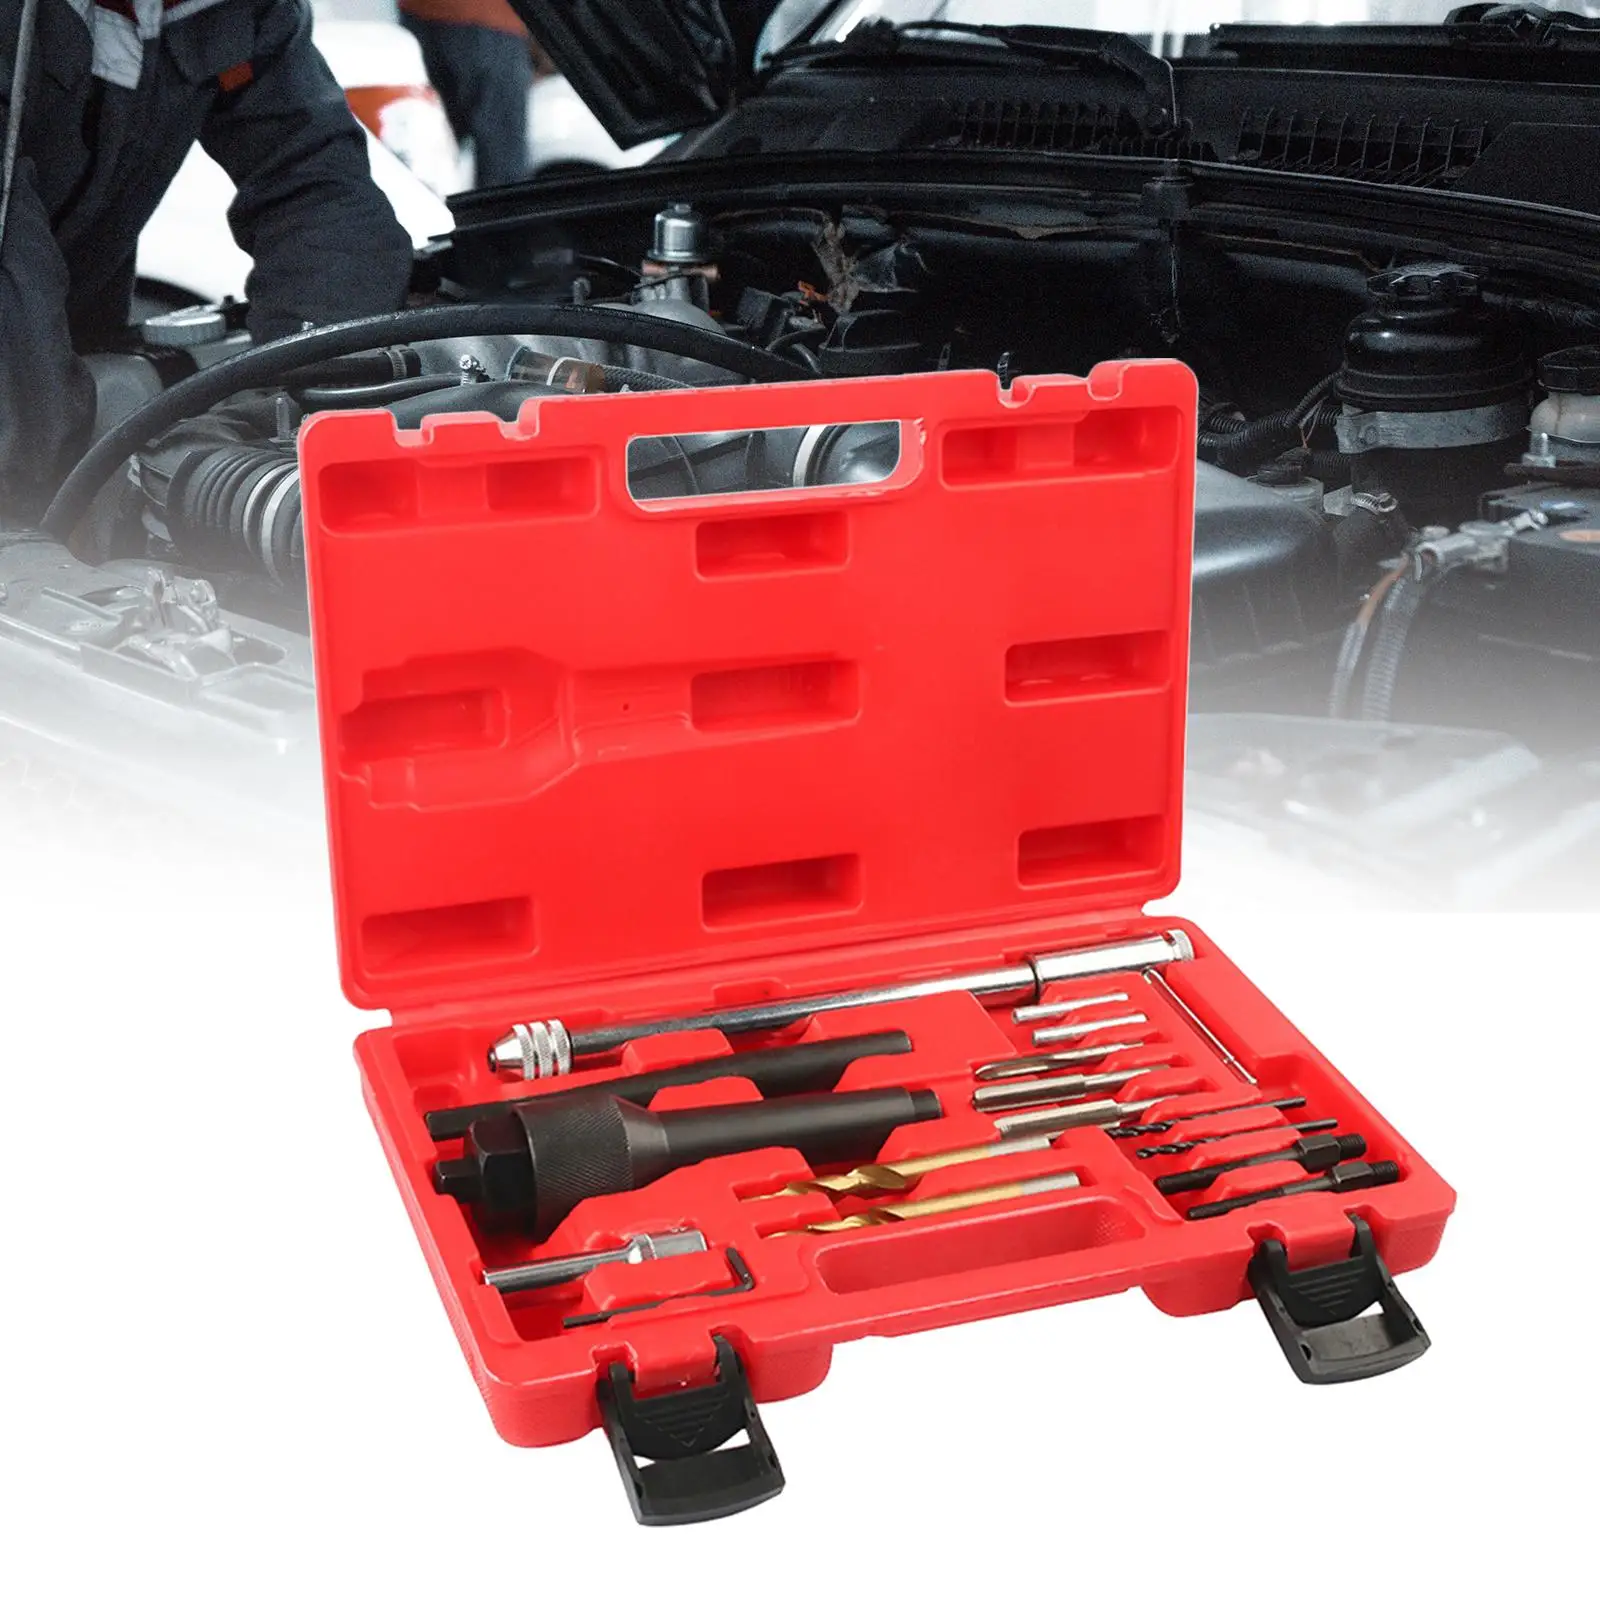 

16Pcs Generic Glow Plug Removal Remover Tool Kit Accessories with Carry Case